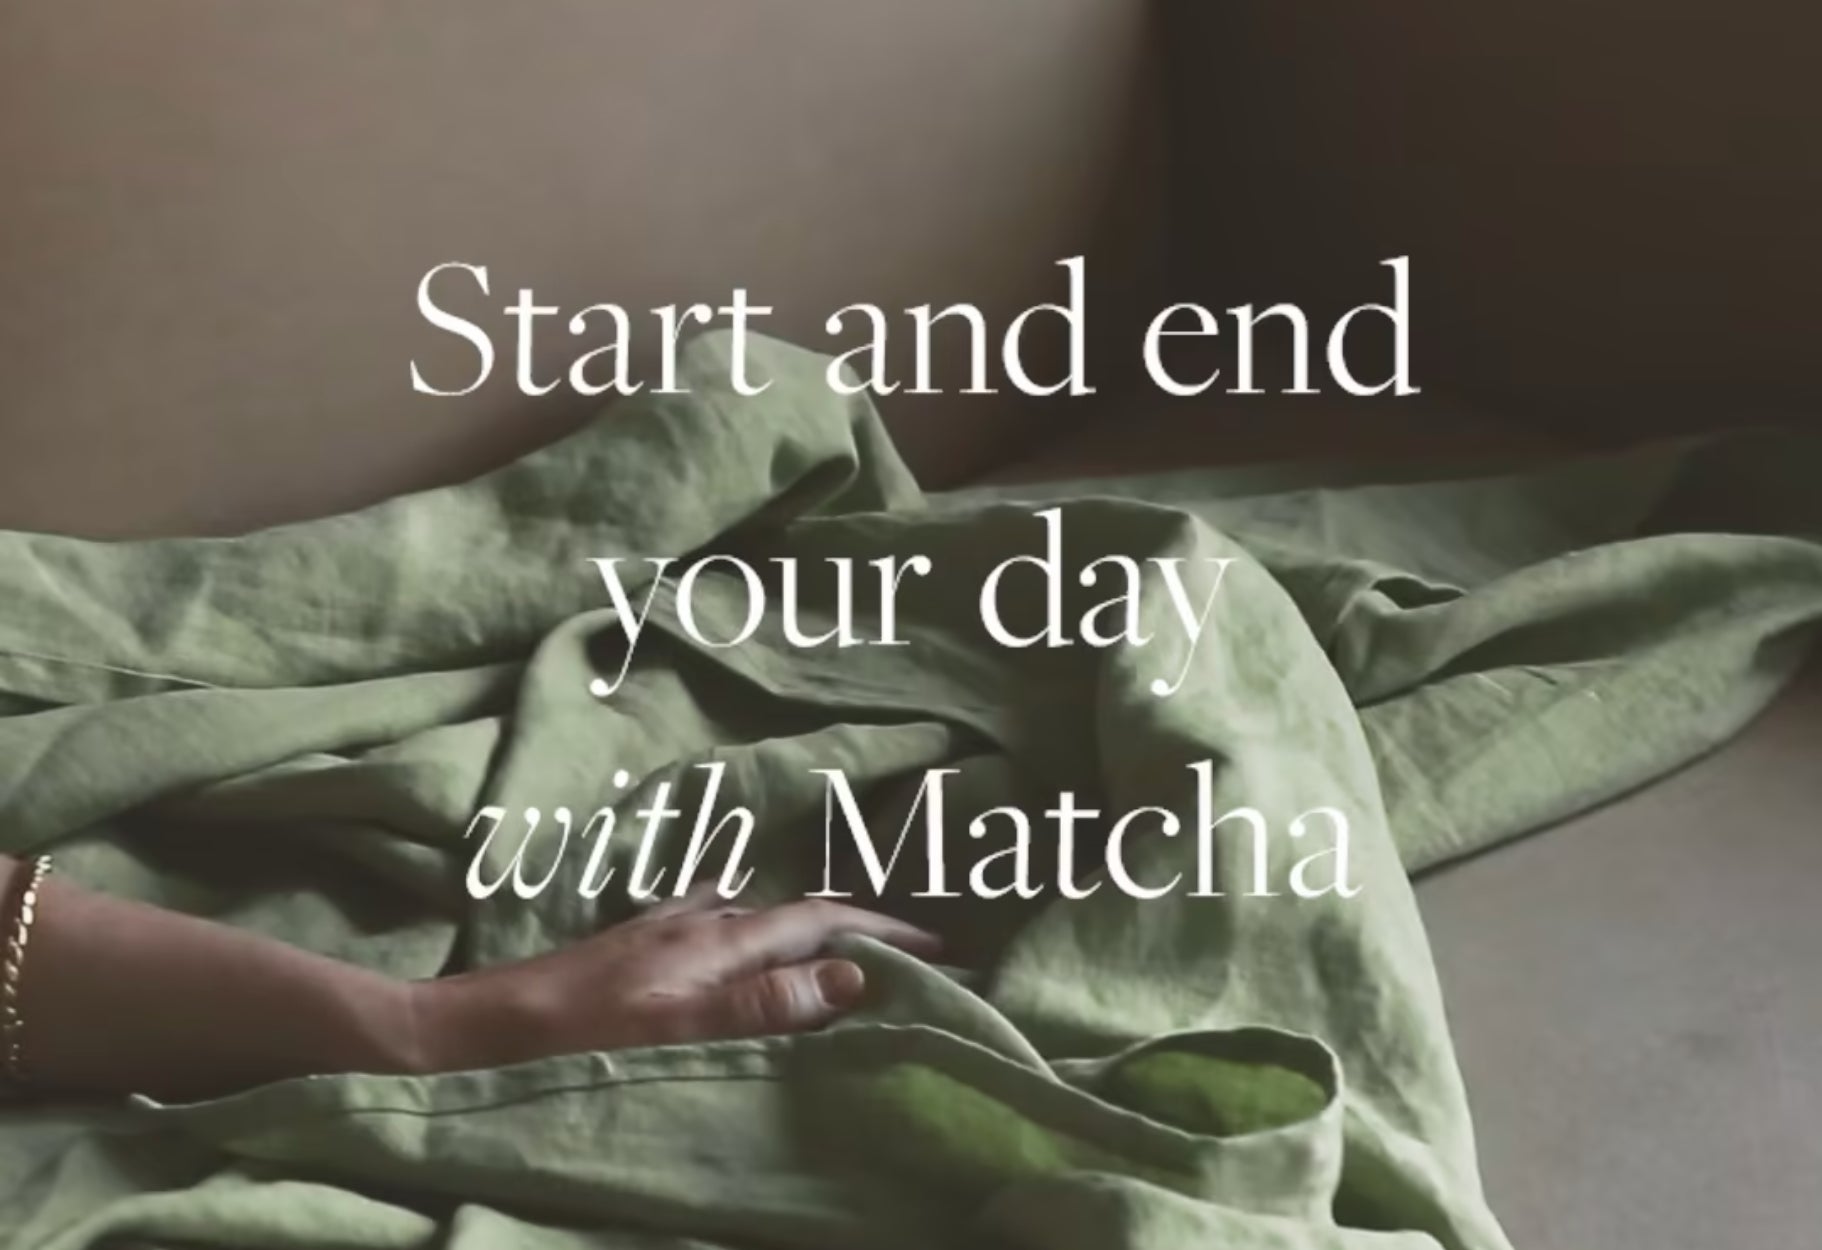 Start and end your day with Matcha